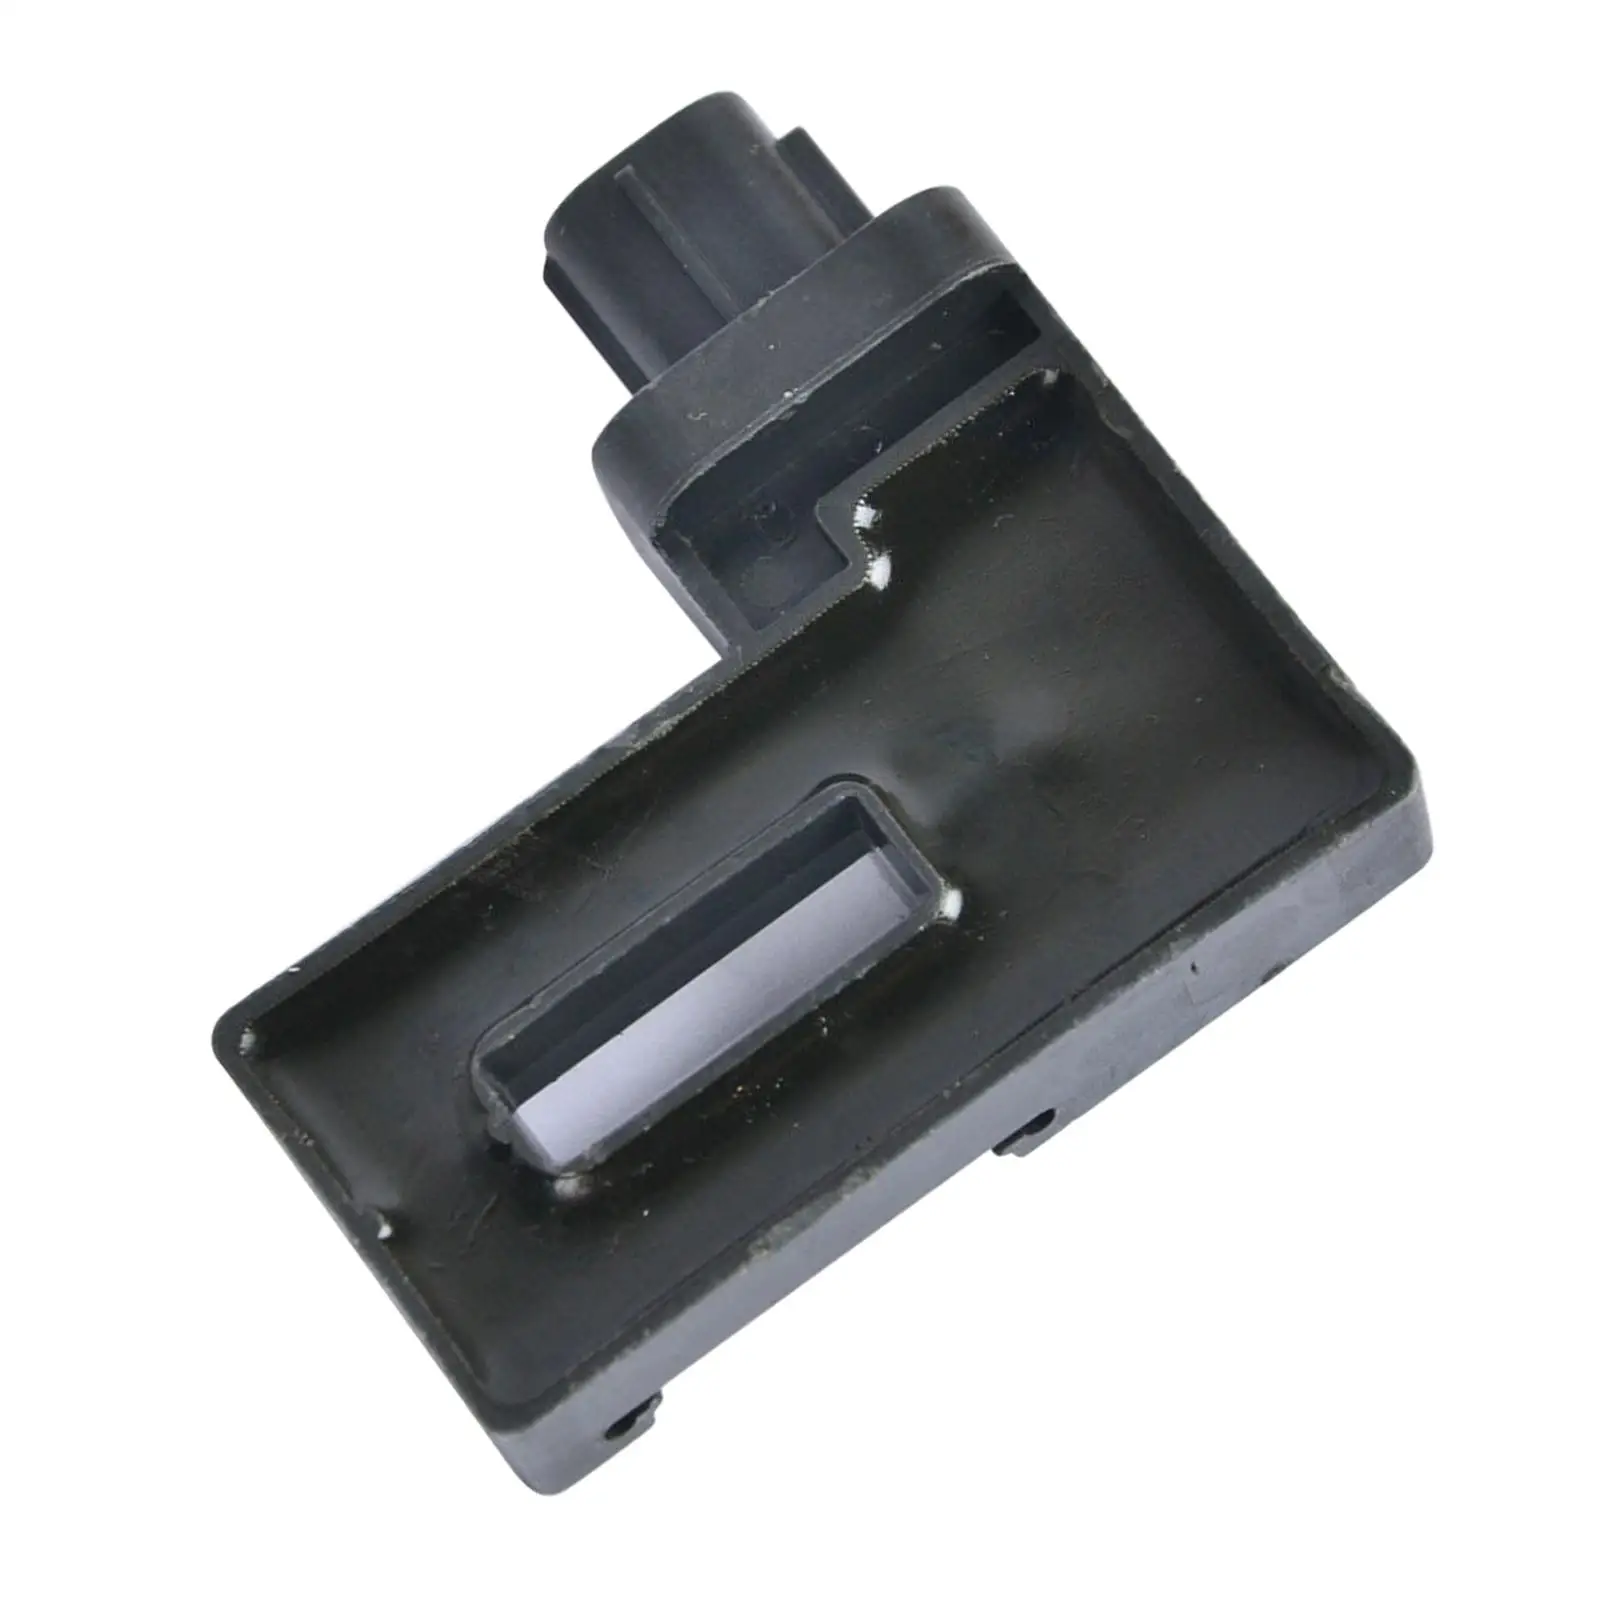 Battery Current Sensor 294G0-1HH0A, 014, Replacement Spare  Easy to Install